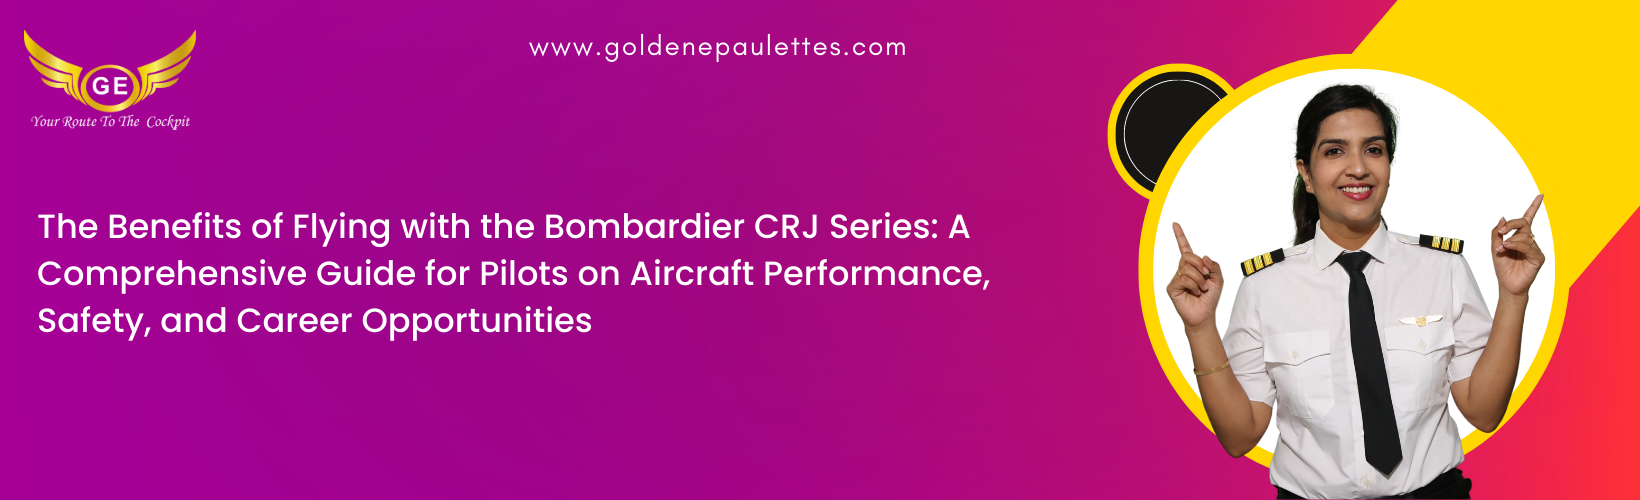 11.The Benefits of Flying with the Bombardier CRJ Series